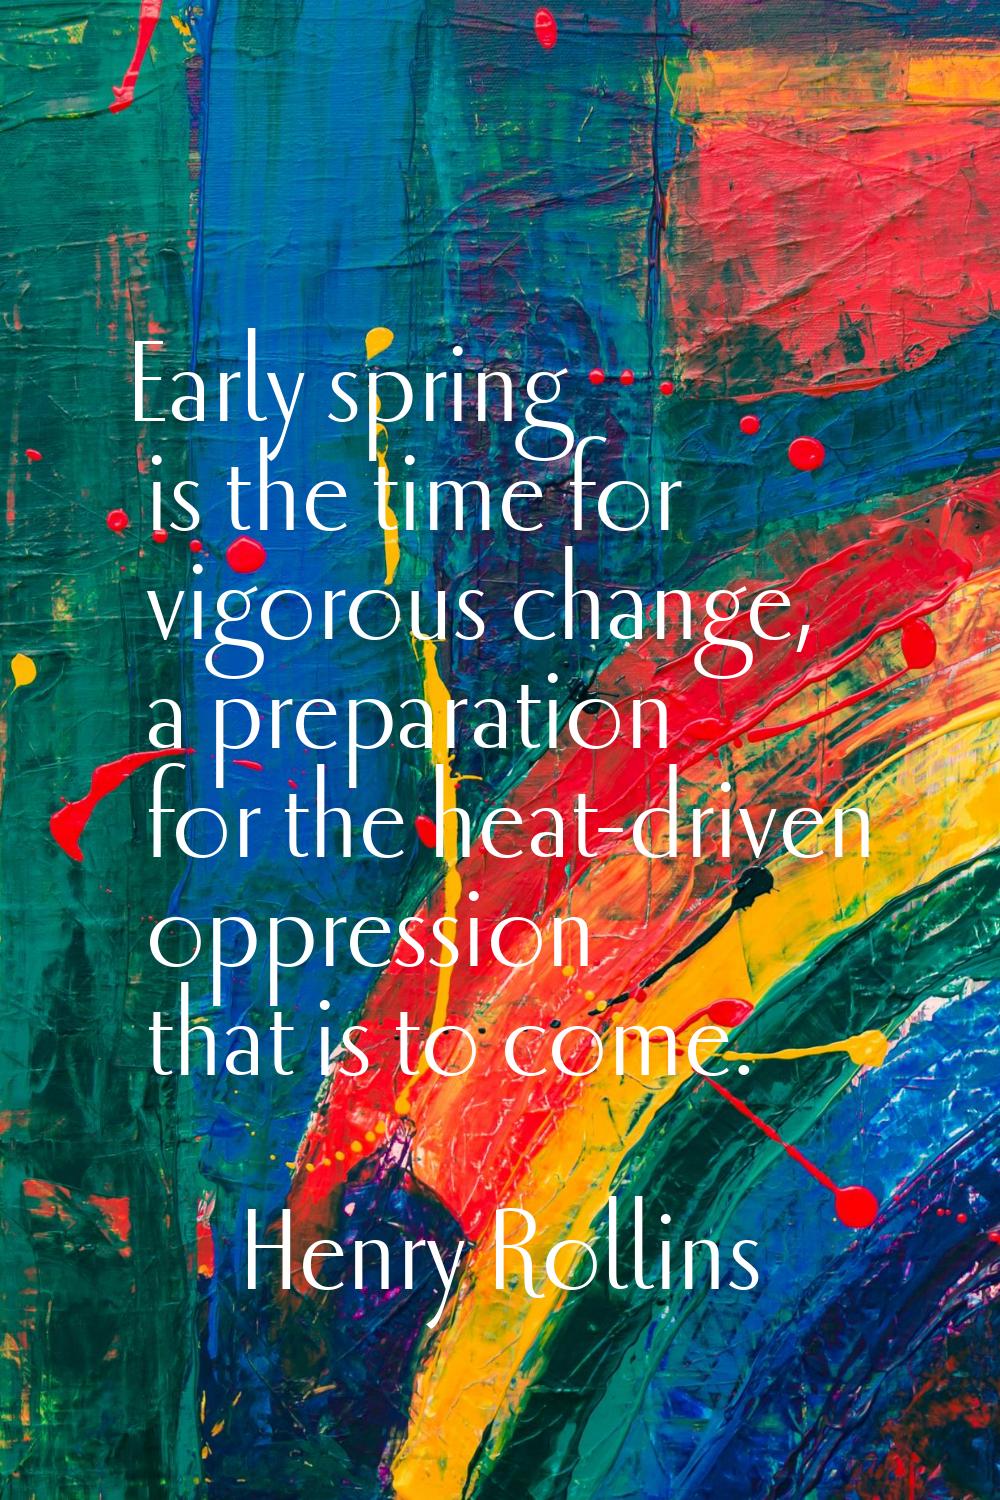 Early spring is the time for vigorous change, a preparation for the heat-driven oppression that is 